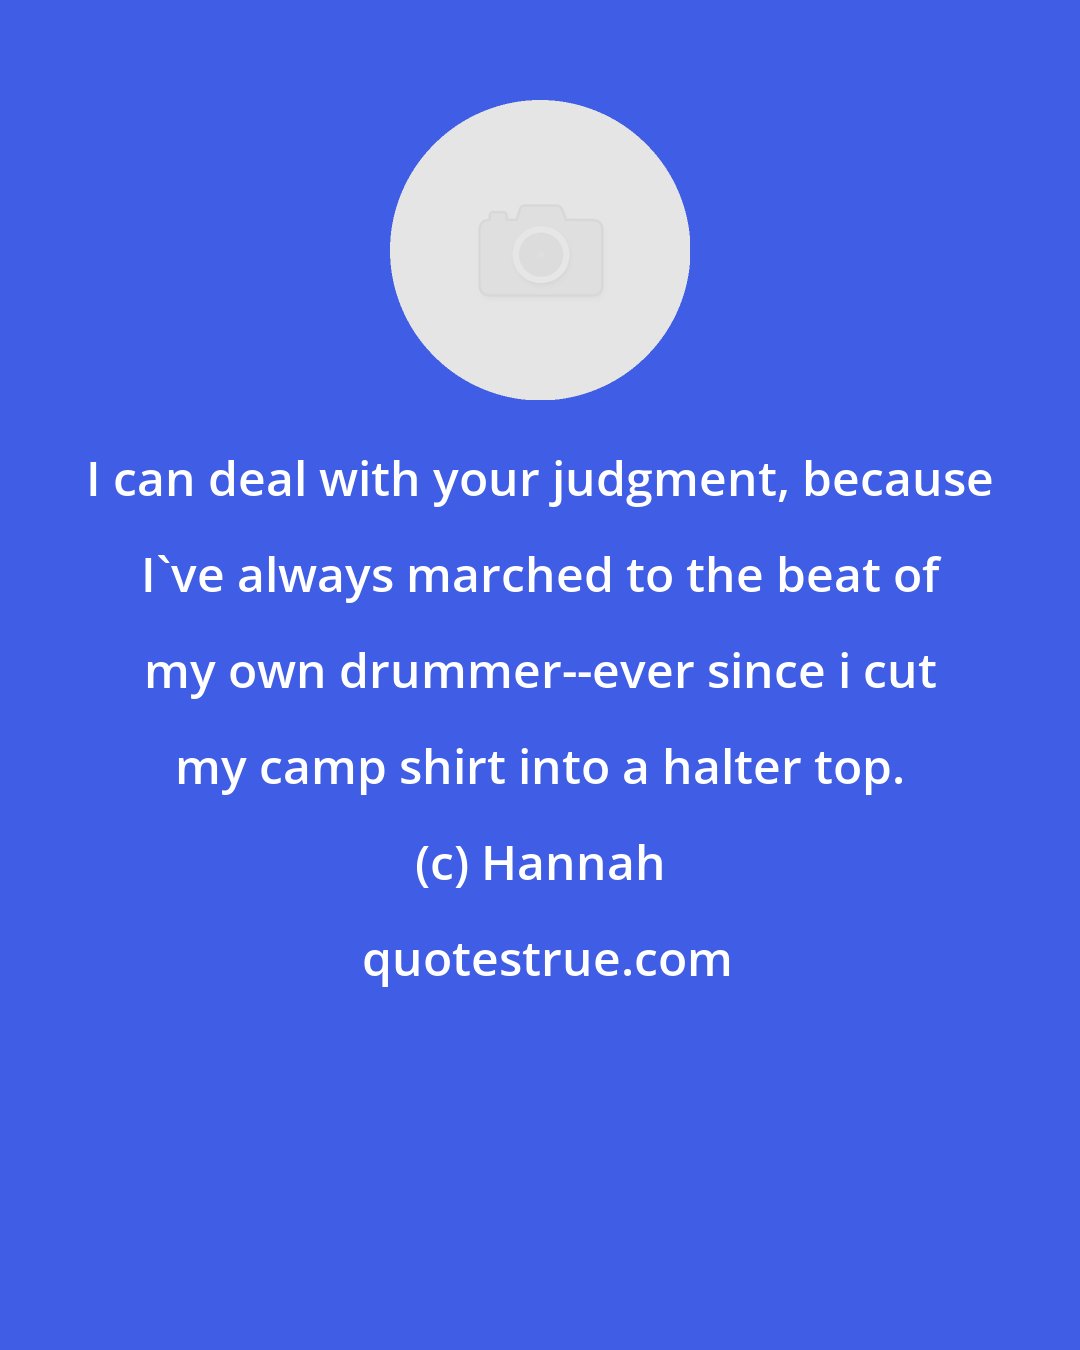 Hannah: I can deal with your judgment, because I've always marched to the beat of my own drummer--ever since i cut my camp shirt into a halter top.